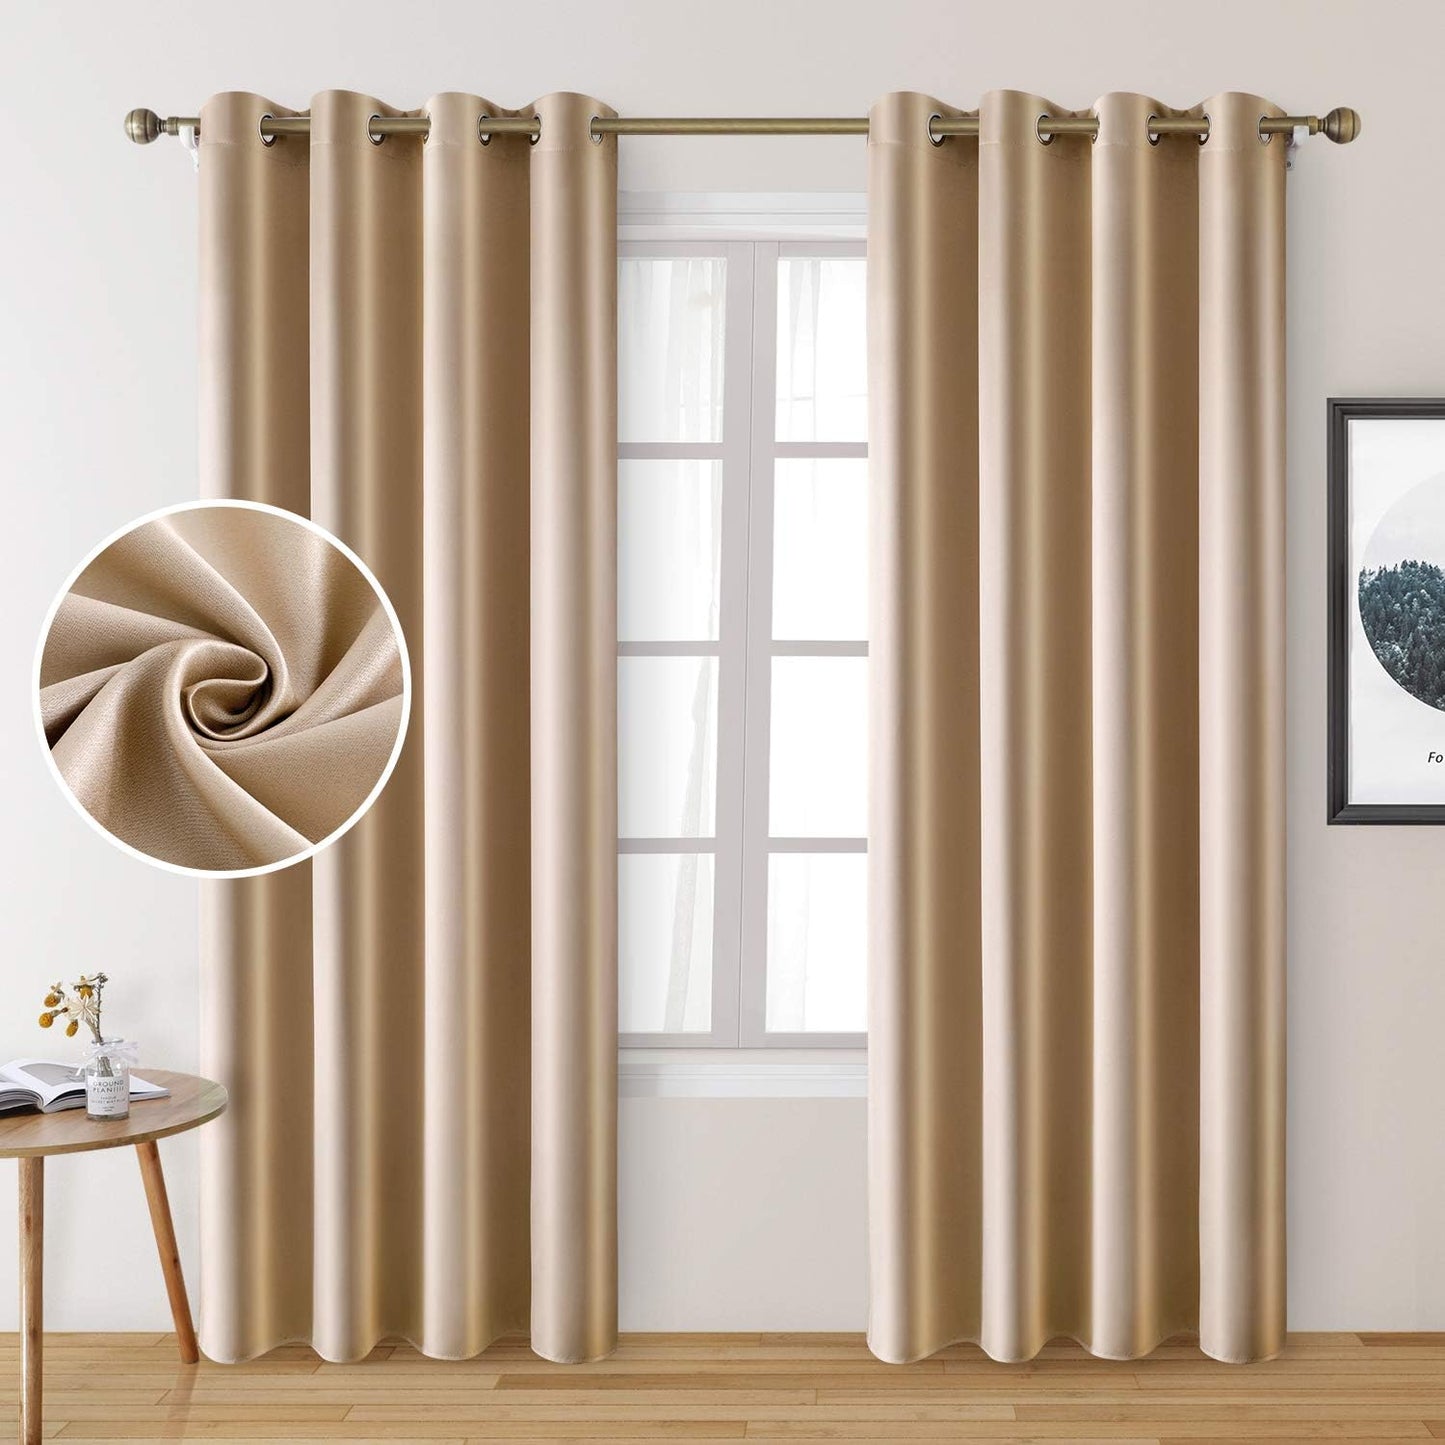 HOMEIDEAS Gold Blackout Curtains, Faux Silk for Bedroom 52 X 84 Inch Room Darkening Satin Thermal Insulated Drapes for Window, Indoor, Living Room, 2 Panels  HOMEIDEAS Beige/Champagne Gold 52" X 84" 